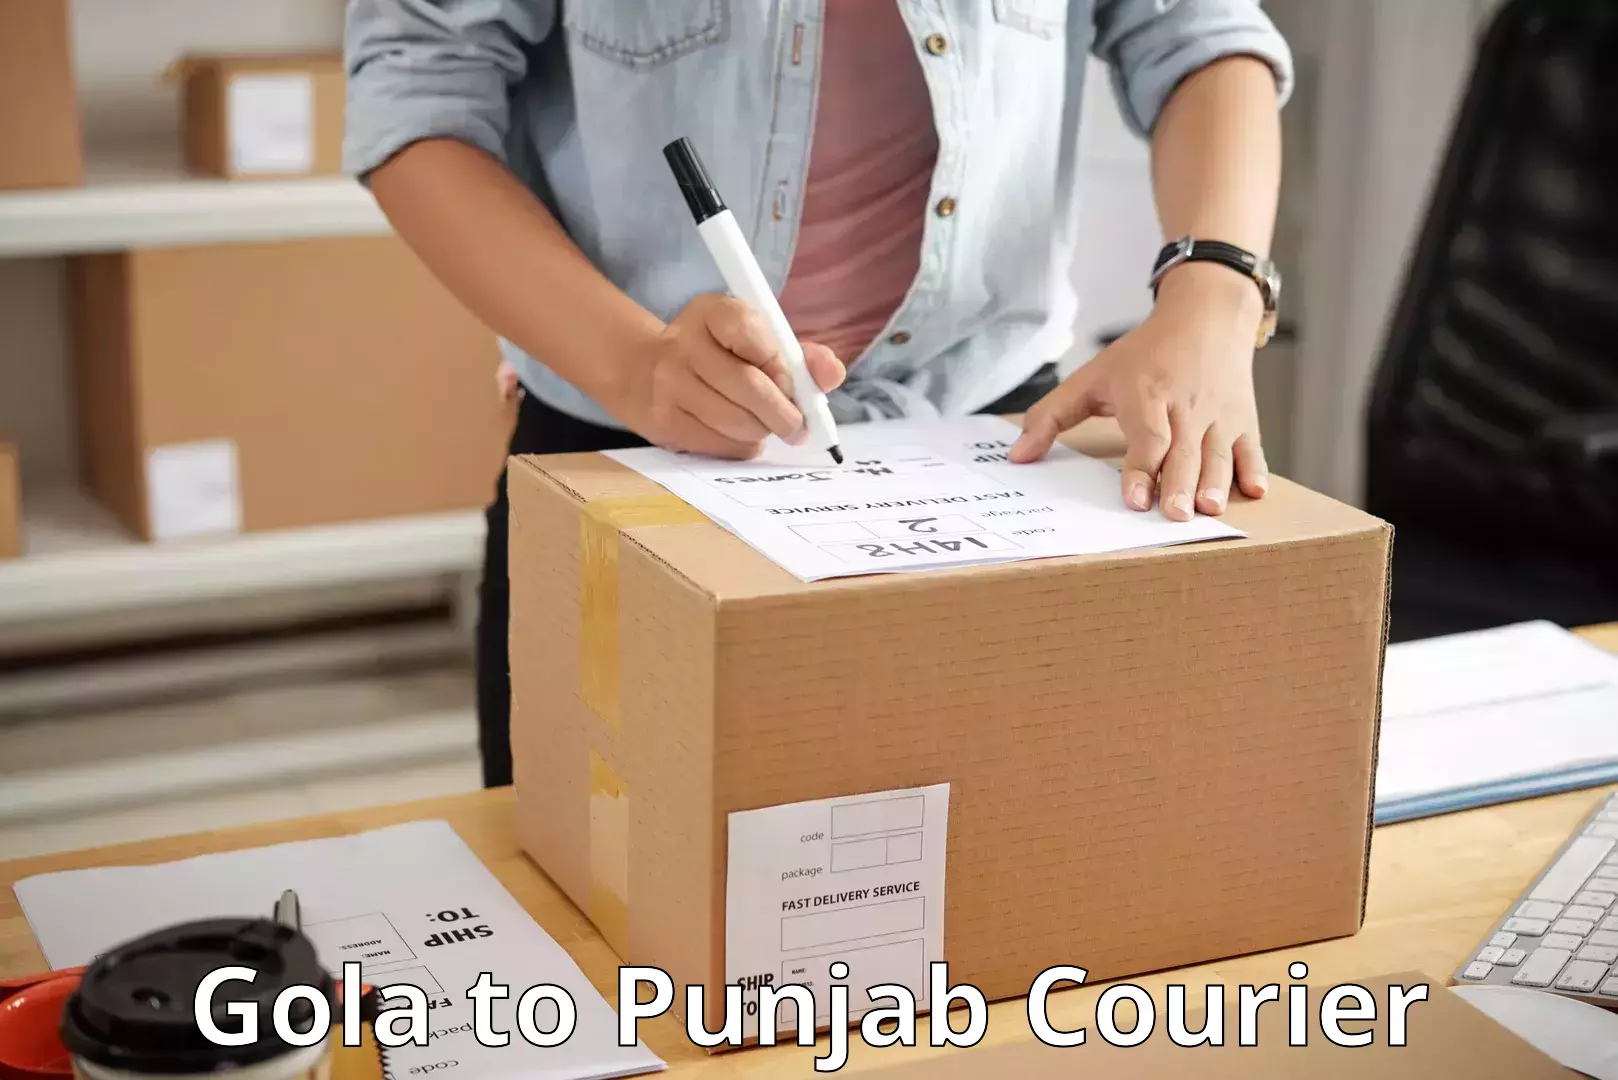 On-call courier service Gola to Punjab